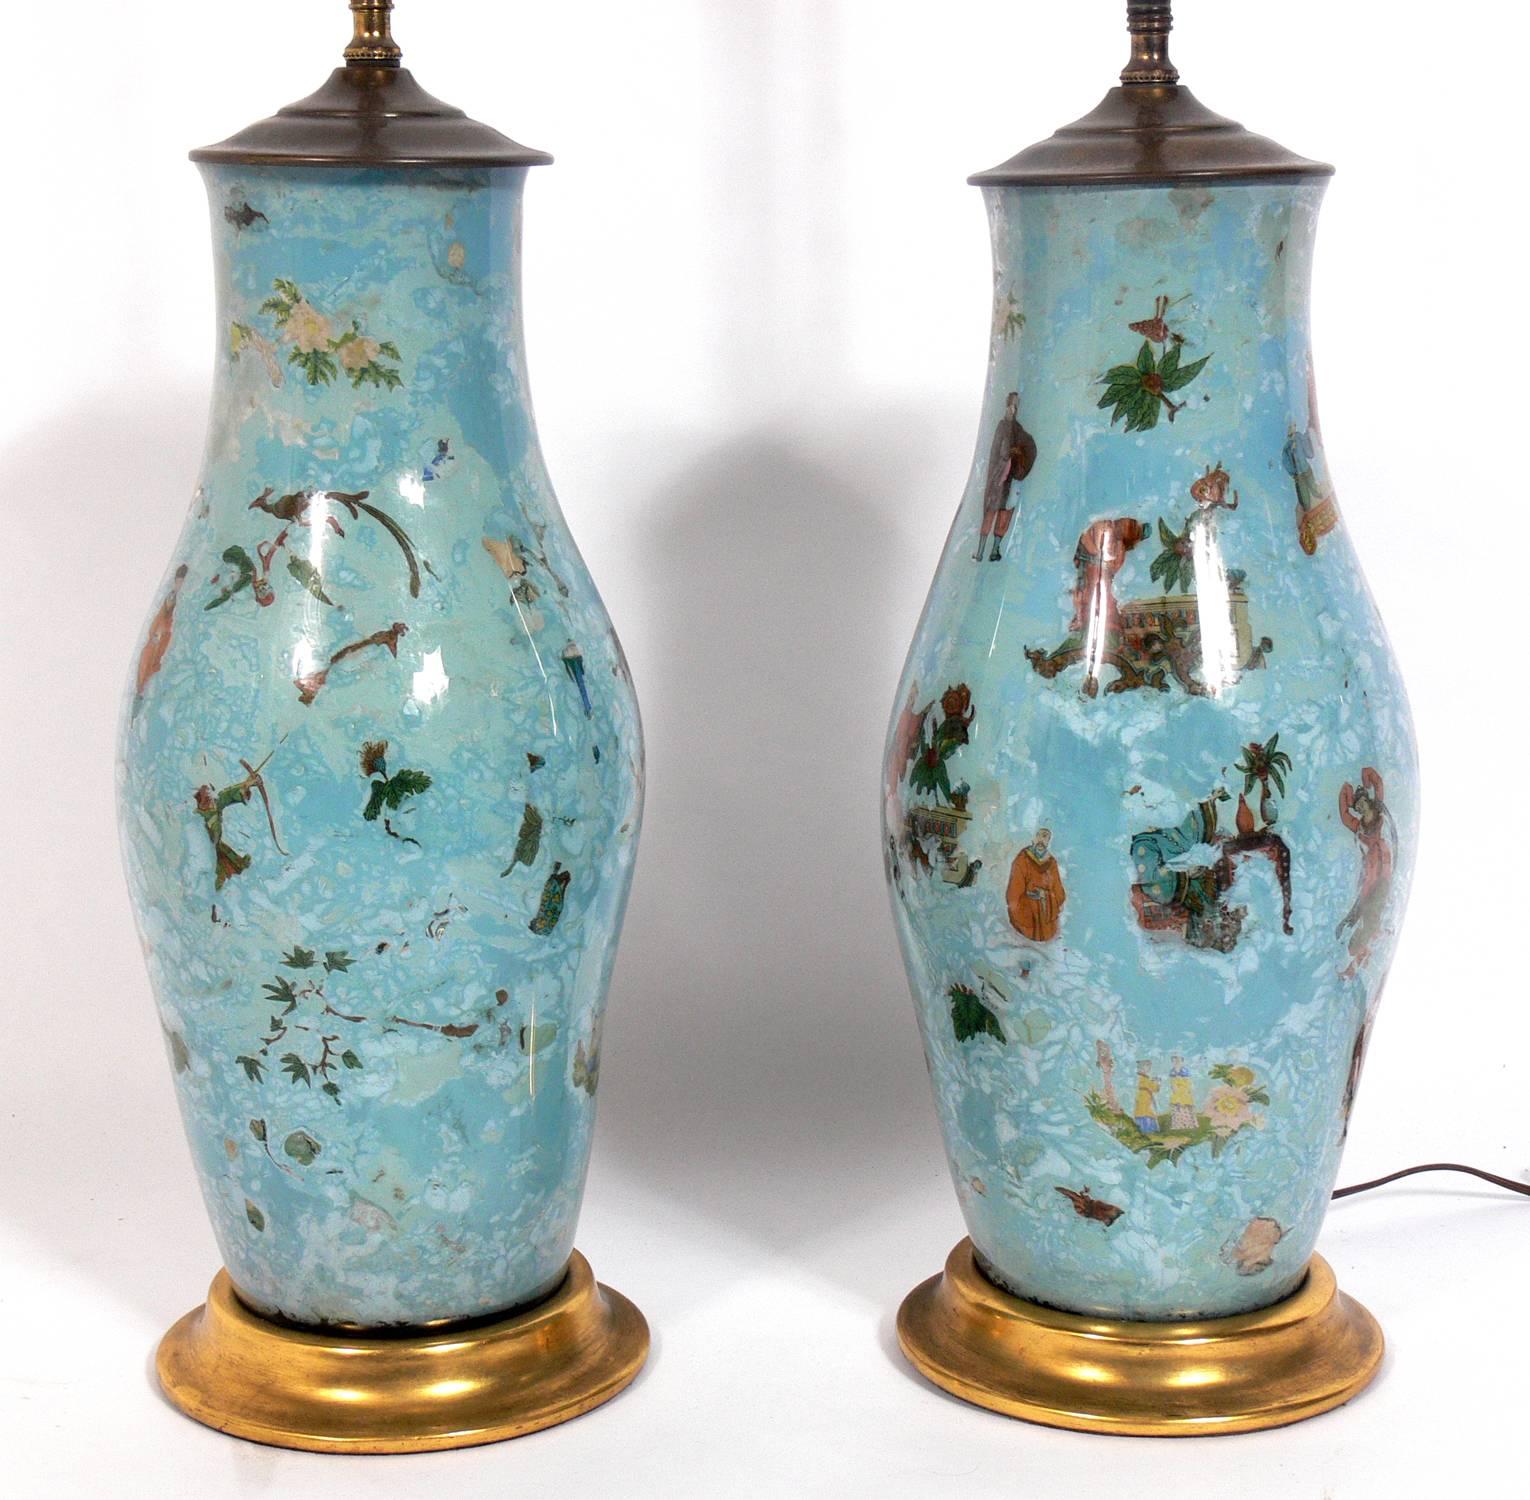 Pair of Robin's Egg Blue Asian Influenced Lamps, probably American, circa 1950s. They are constructed of reverse painted glass with Asian decorations on the interior of the glass and brass fittings. They have been rewired and are ready to use. The